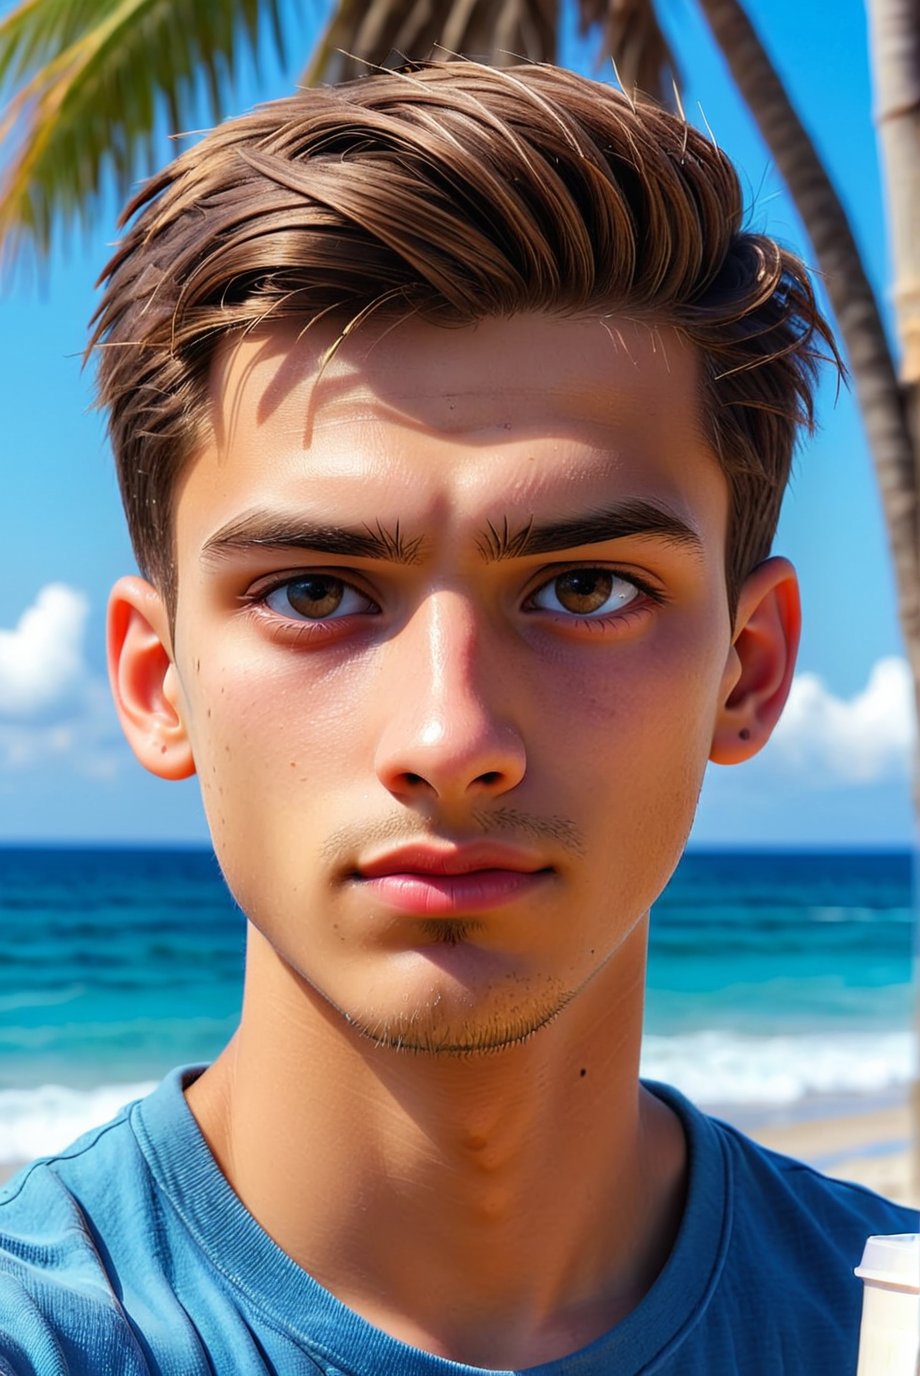 1 boy, (21 years old), short hair, perfect hair, light skin, white, Italian brown, realism, cool, Nonchalant, beach day, trunks, half body, conservative, chad, chizzled, bad boy, thug, mean mug, mean face, Instagram, selfie, handsome, cool, masculine, hard, innocent, happy, young, vibrant, cute, slender/slim body shape, normal size head, head that fits body, high quality, masterpiece , 3D, background of school